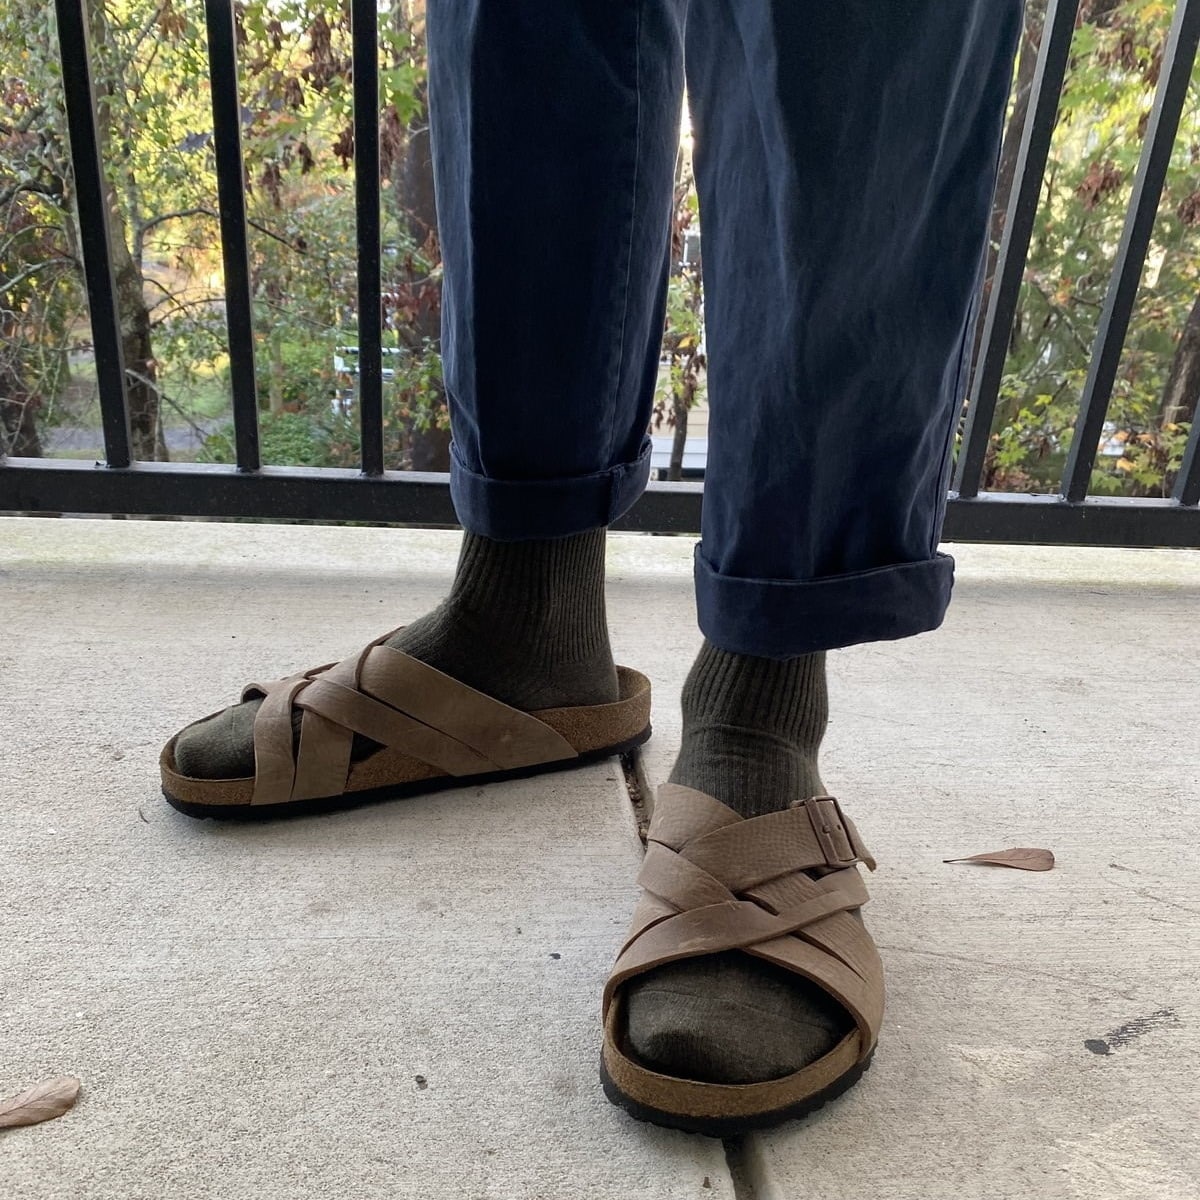 Socks and sandals combination continues to divide opinion. Is it a faux pas  or the perfect pairing? - ABC News